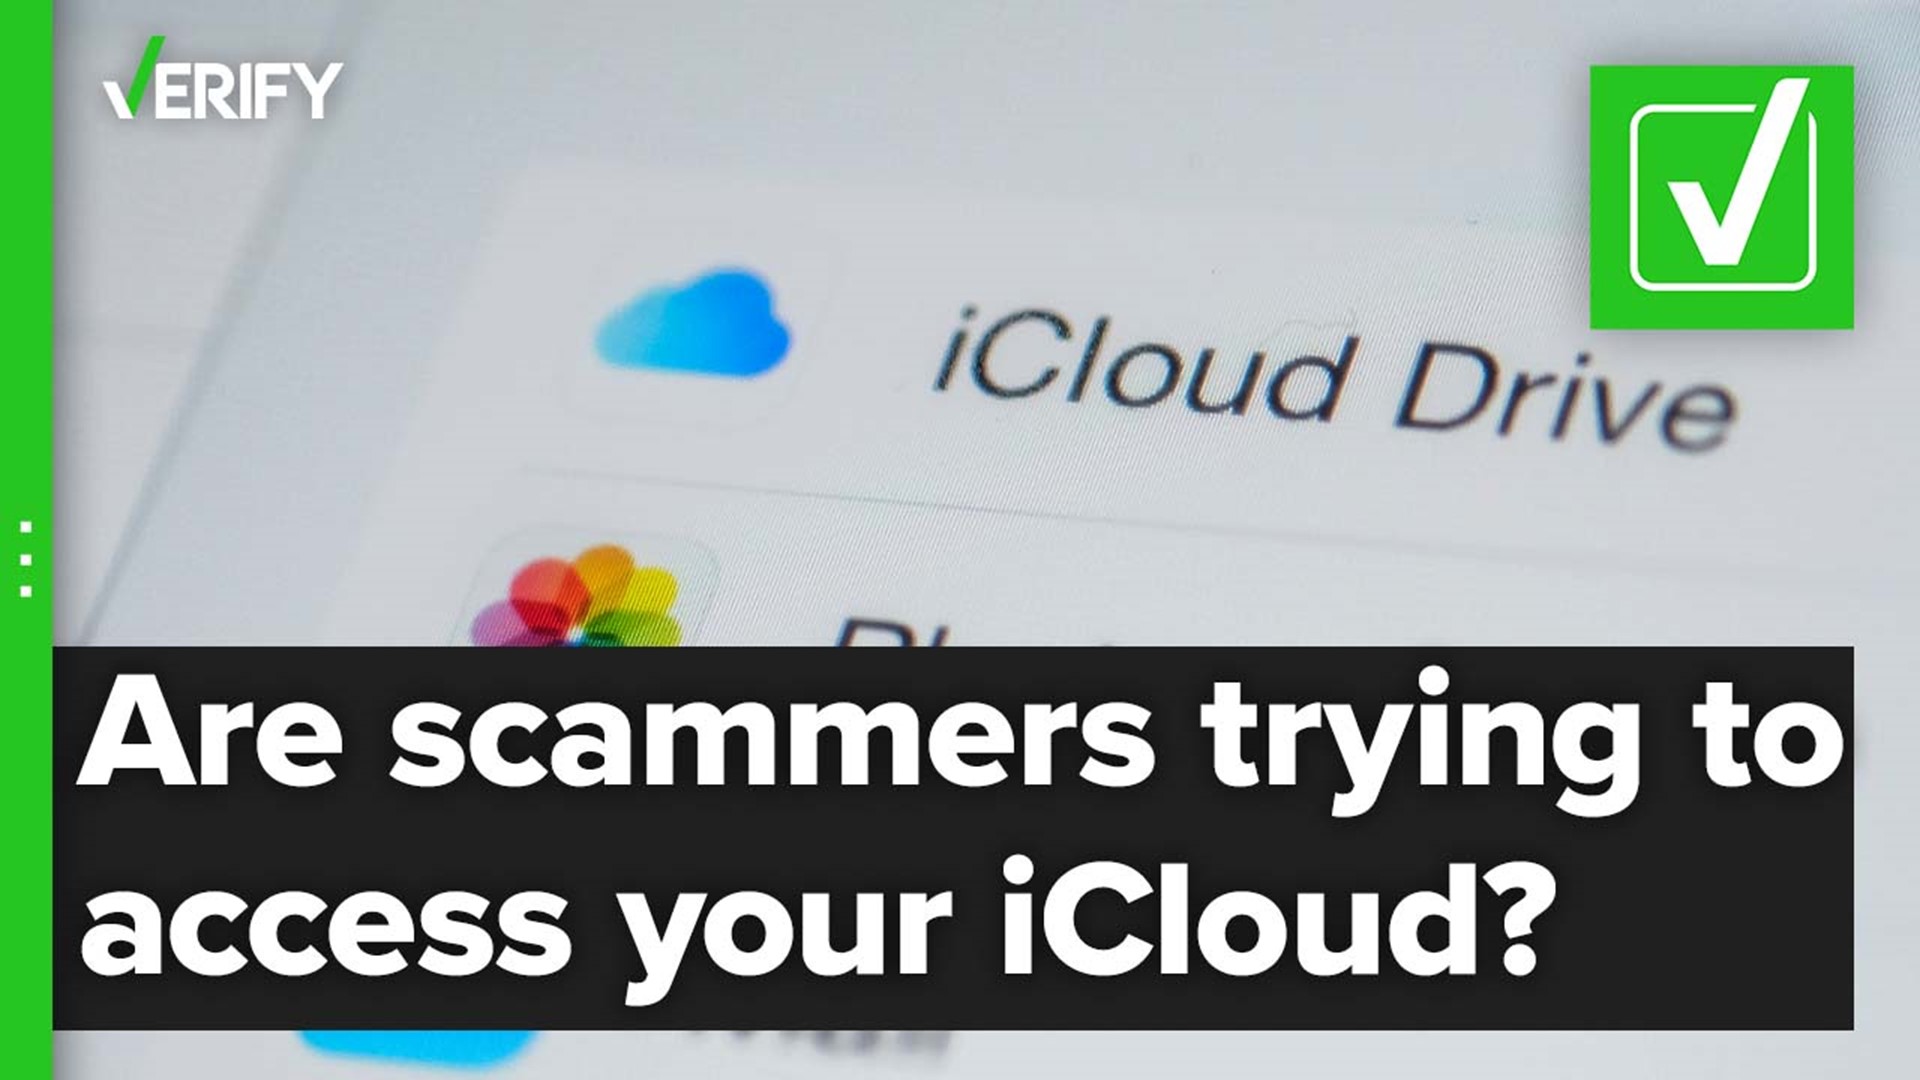 Scammers are calling people claiming their iCloud accounts have been compromised. Here’s how to spot a phony support call.